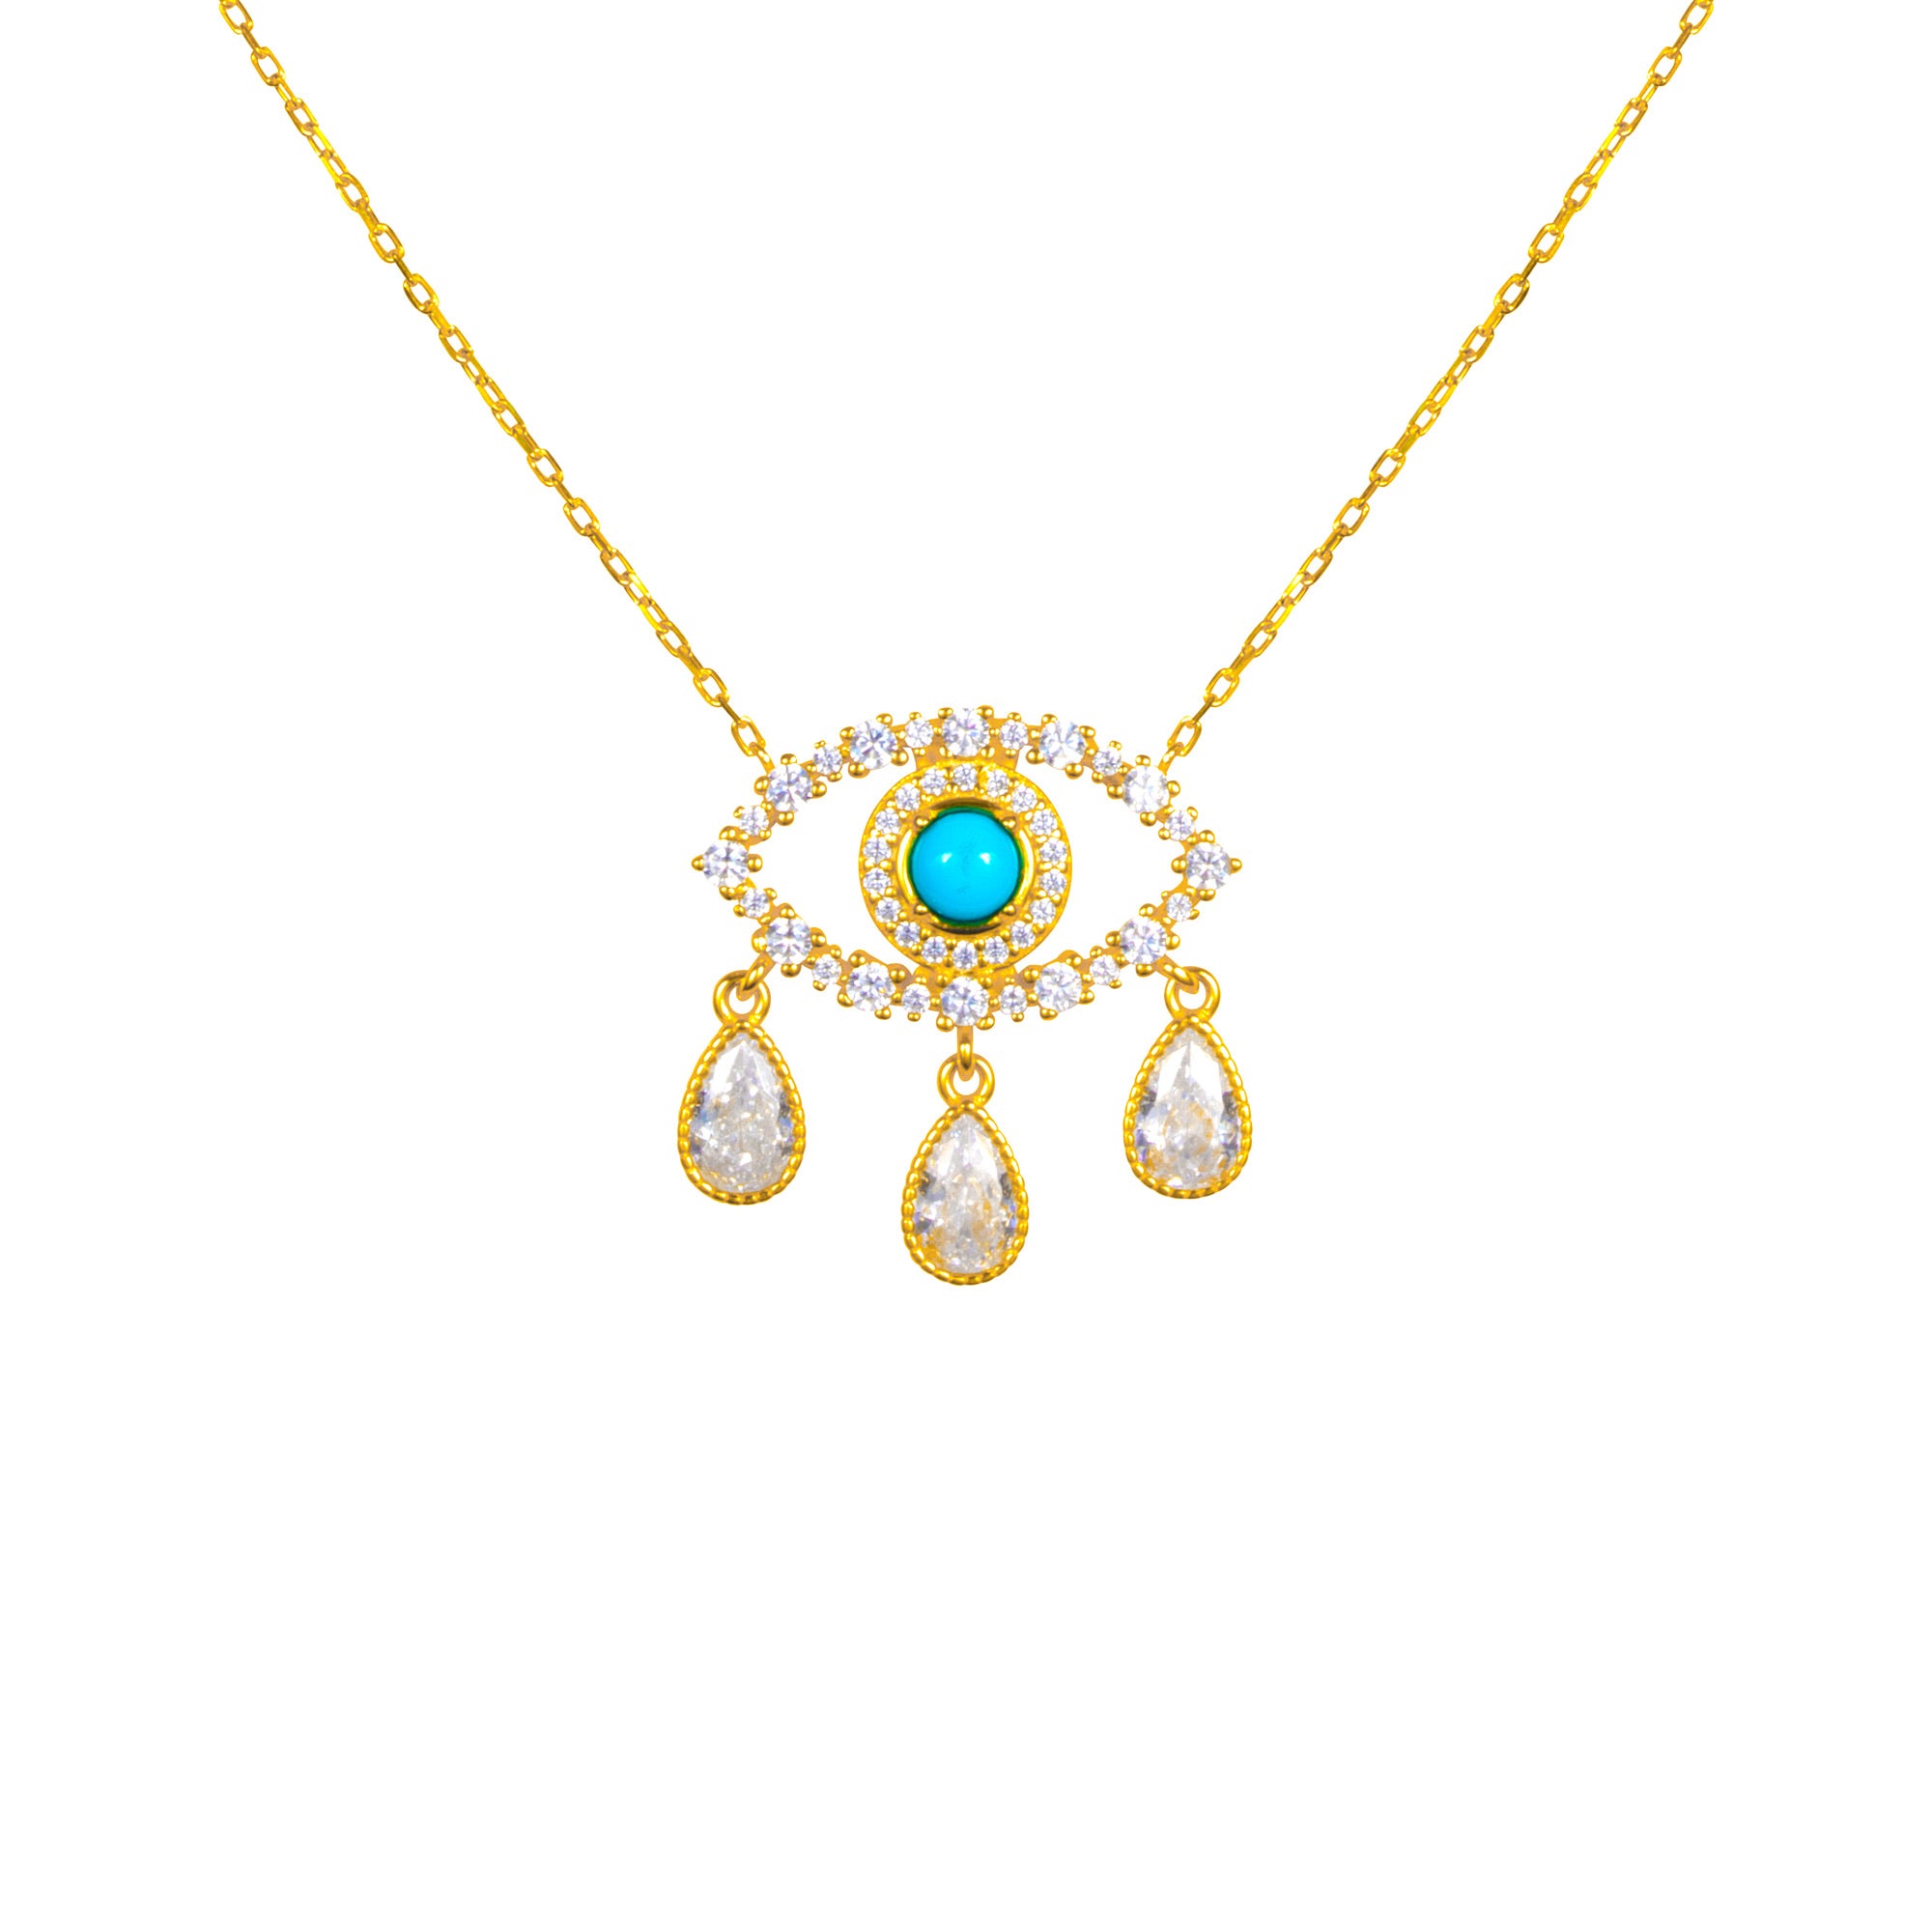 Gold plated turquoise “Diamond Tears" eye necklace